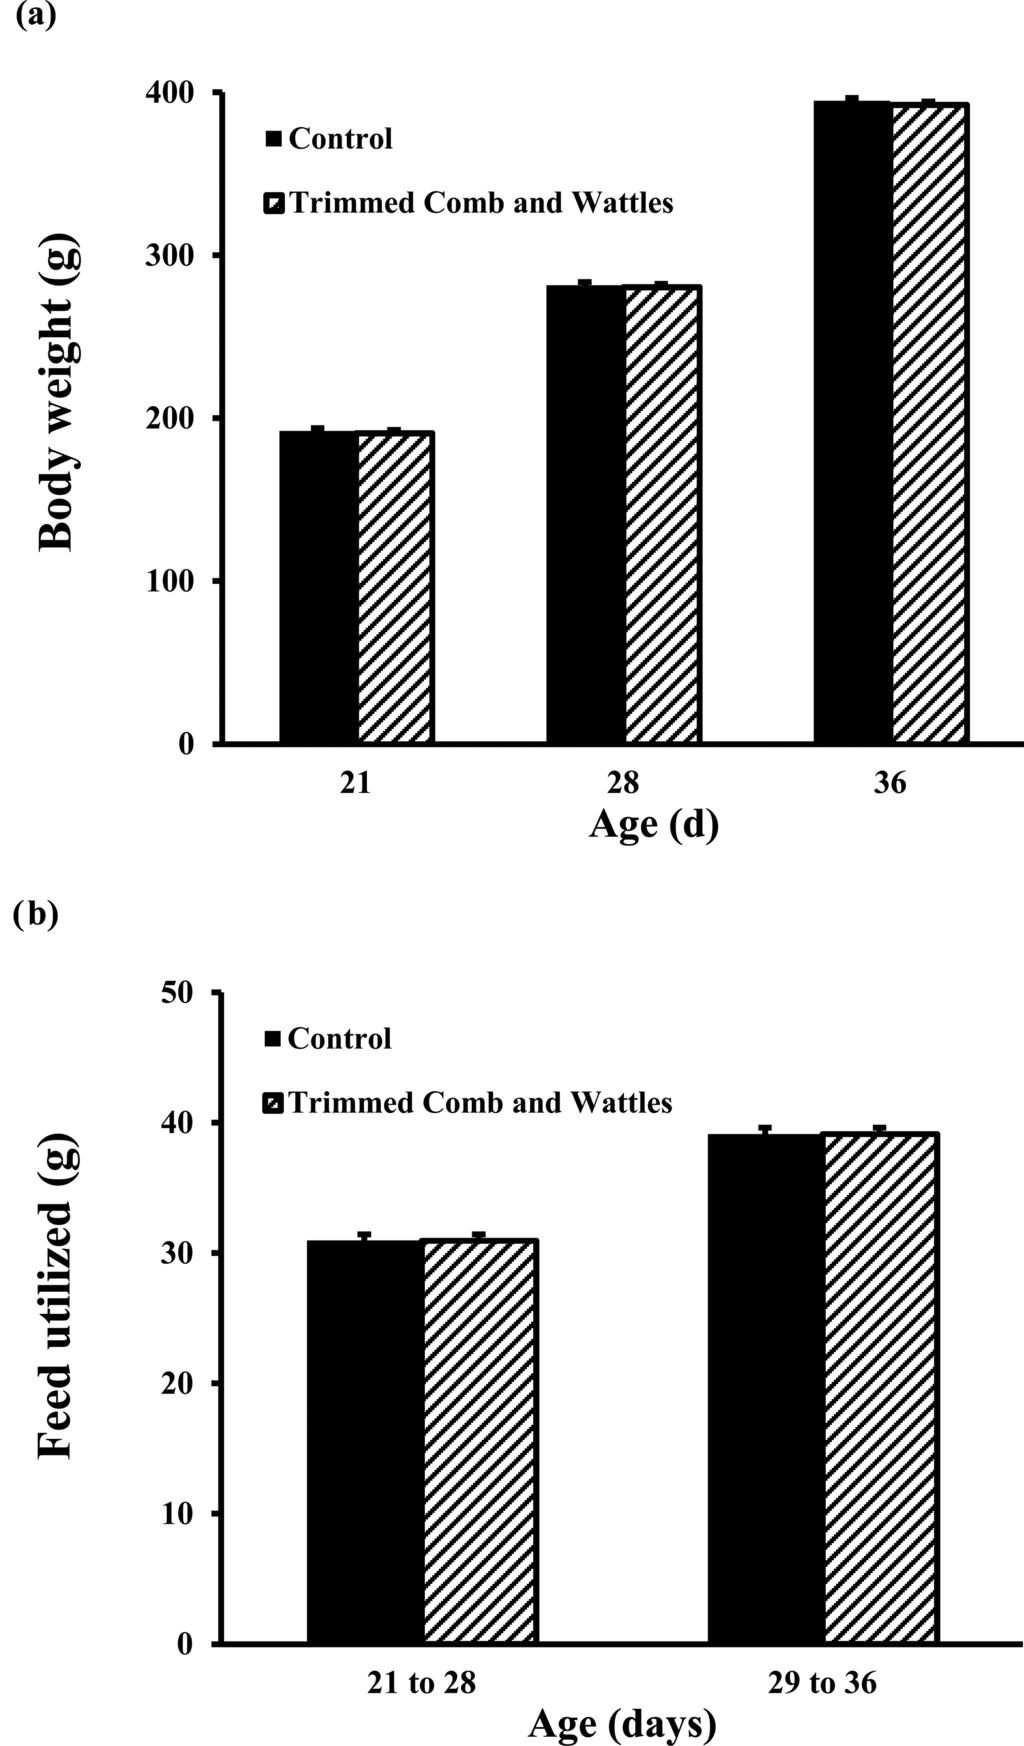 862 HESTER ET AL. Figure 2. (a) BW at 21, 28, and 36 d age and (b) feed usage from 21 to 28 and 29 to 36 d age of pullets whose comb and wattles were trimmed as compared to intact controls. committee.